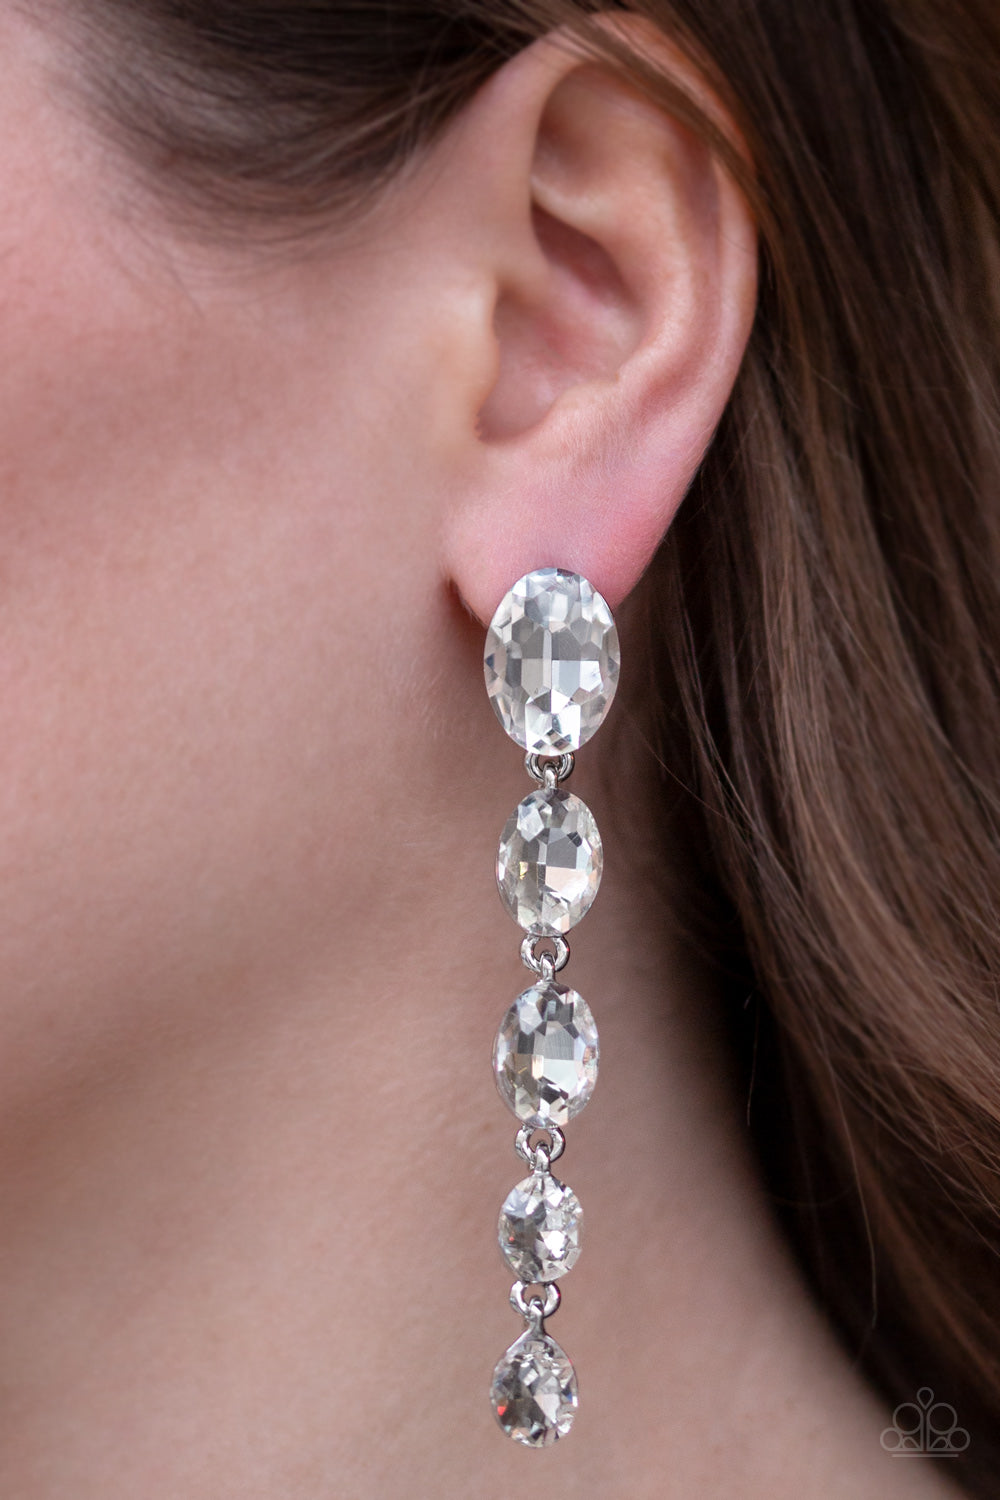 Red Carpet Radiance White Rhinestone Post Earring - Paparazzi Accessories  Gradually decreasing in size, glittery white gems trickle from the ear in a glamorous fashion. Earring attaches to a standard post fitting.  Sold as one pair of post earrings.